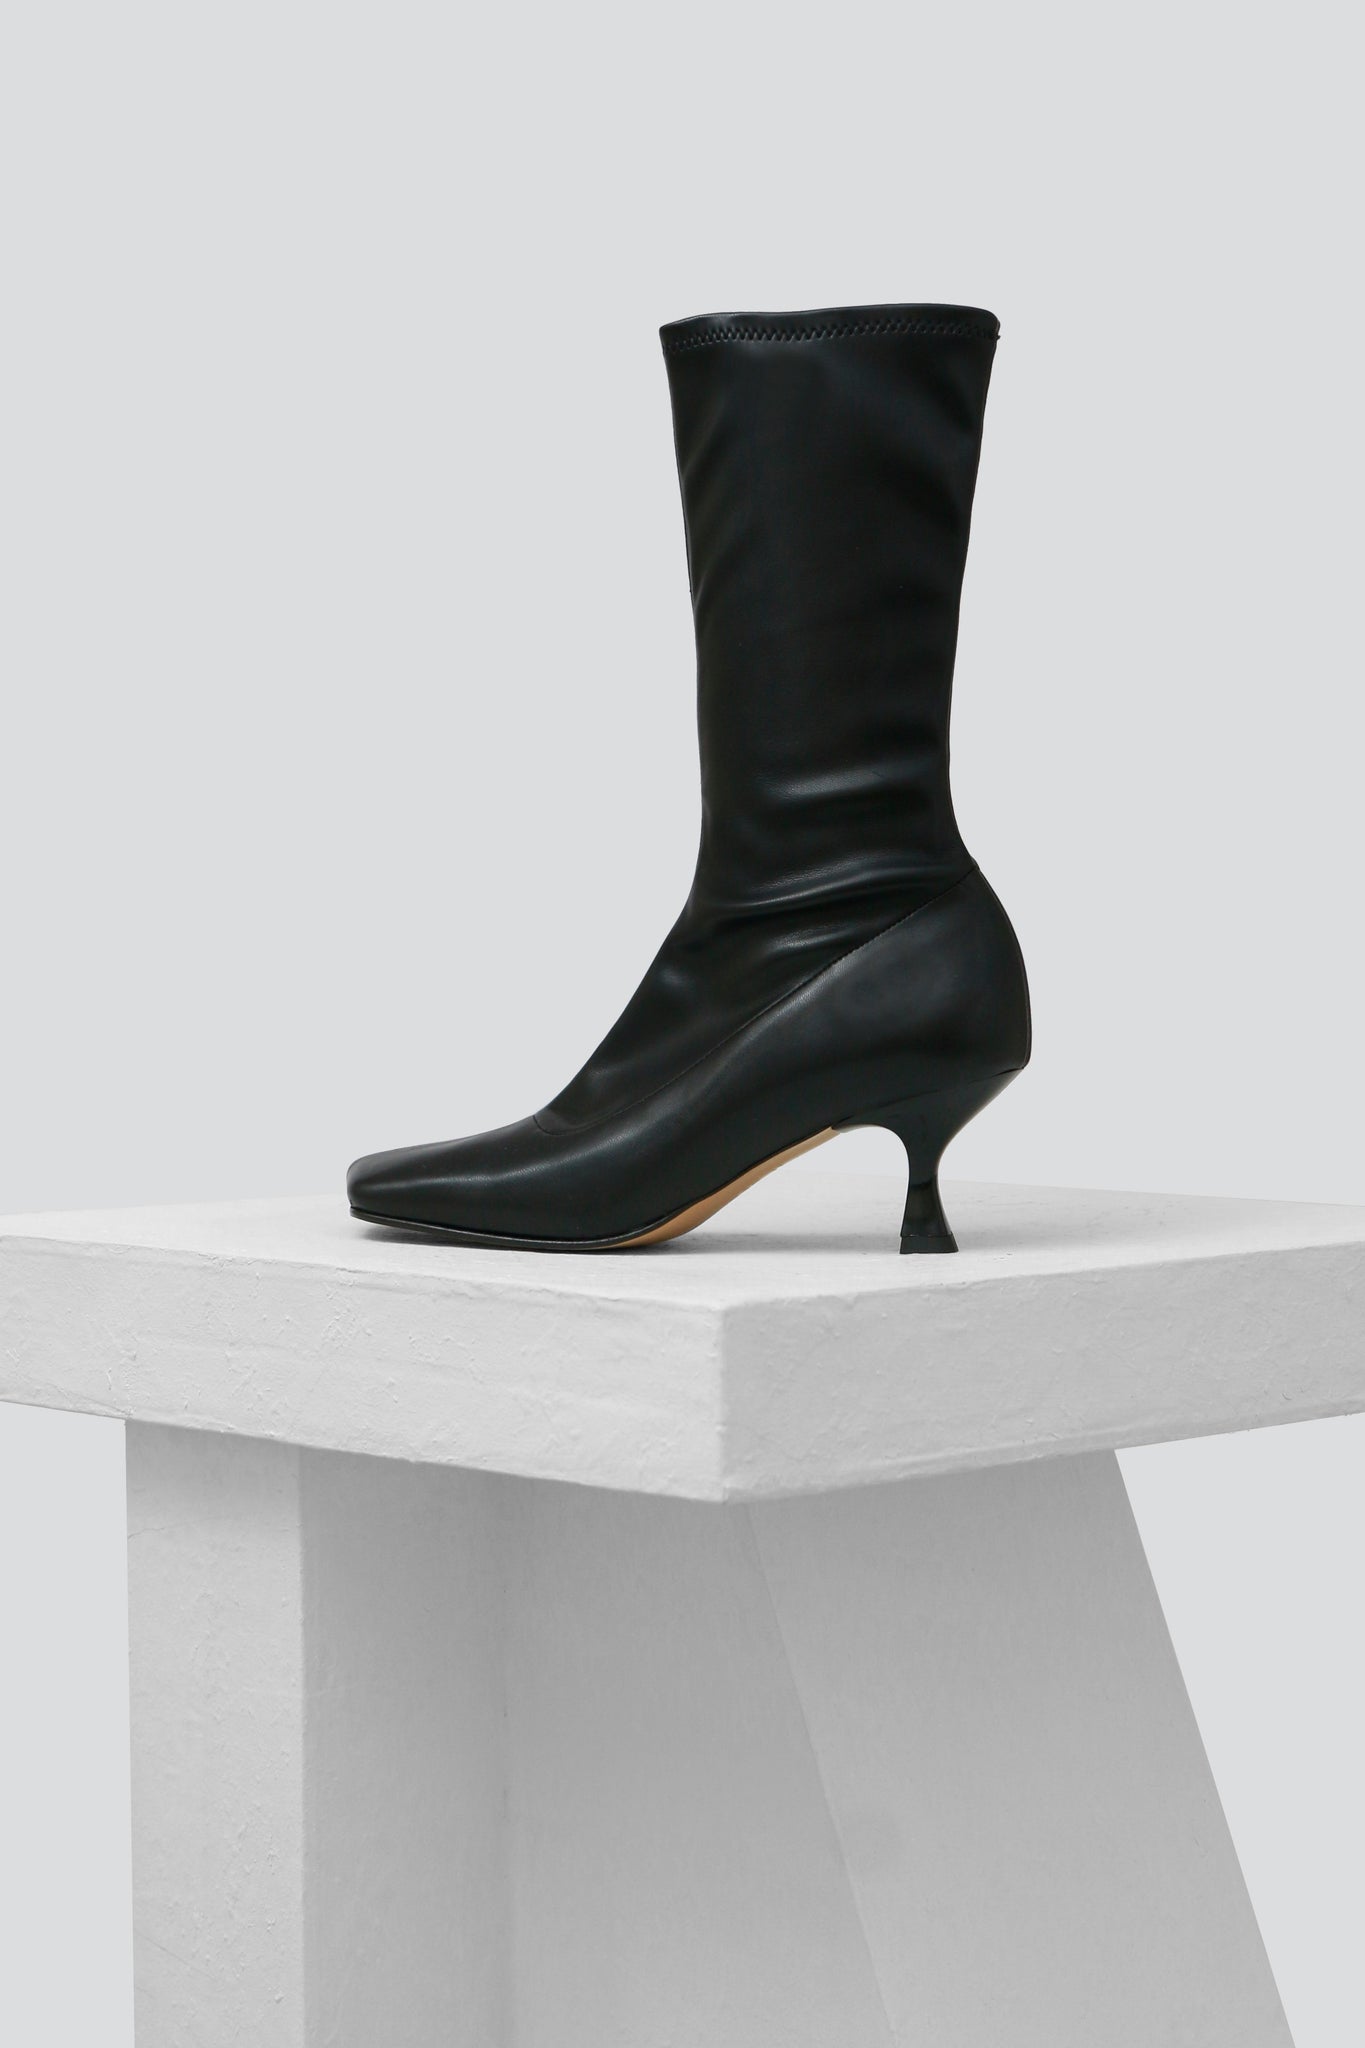 LOLA - Black Stretch Faux Leather Ankle Boots